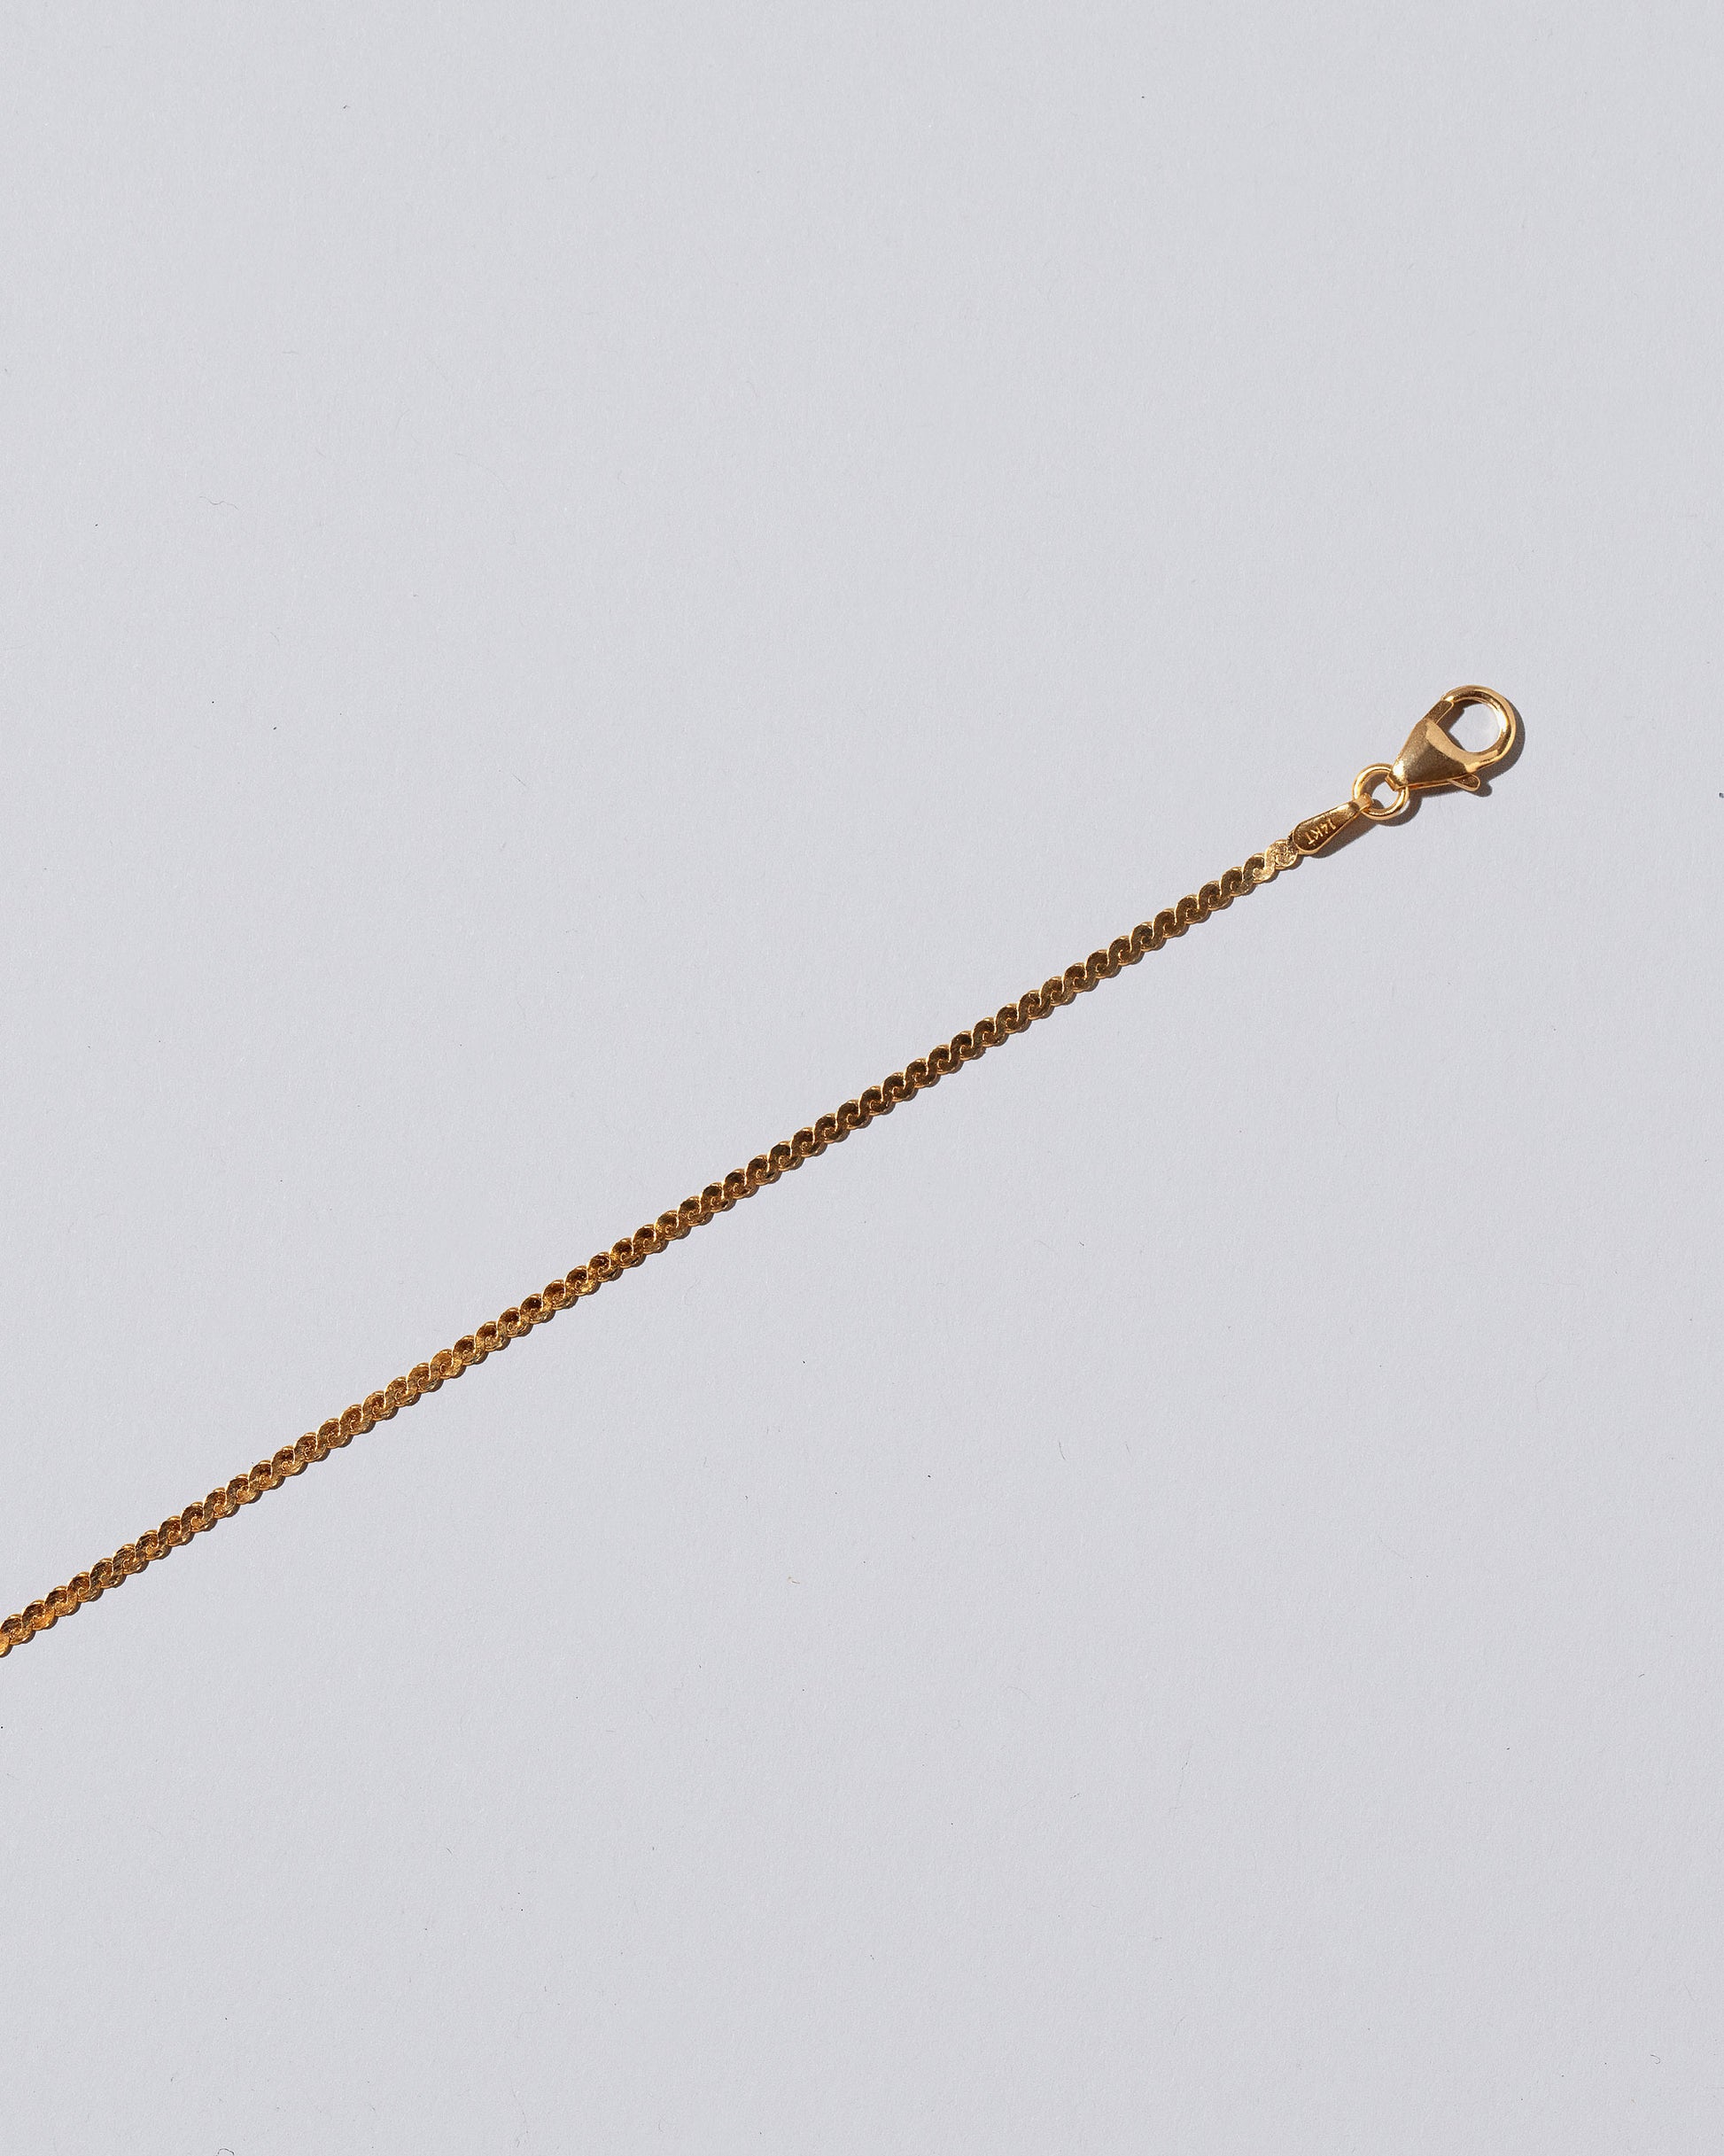 Closeup detail of the Yellow Gold Serpentina Chain Bracelet on light color background.